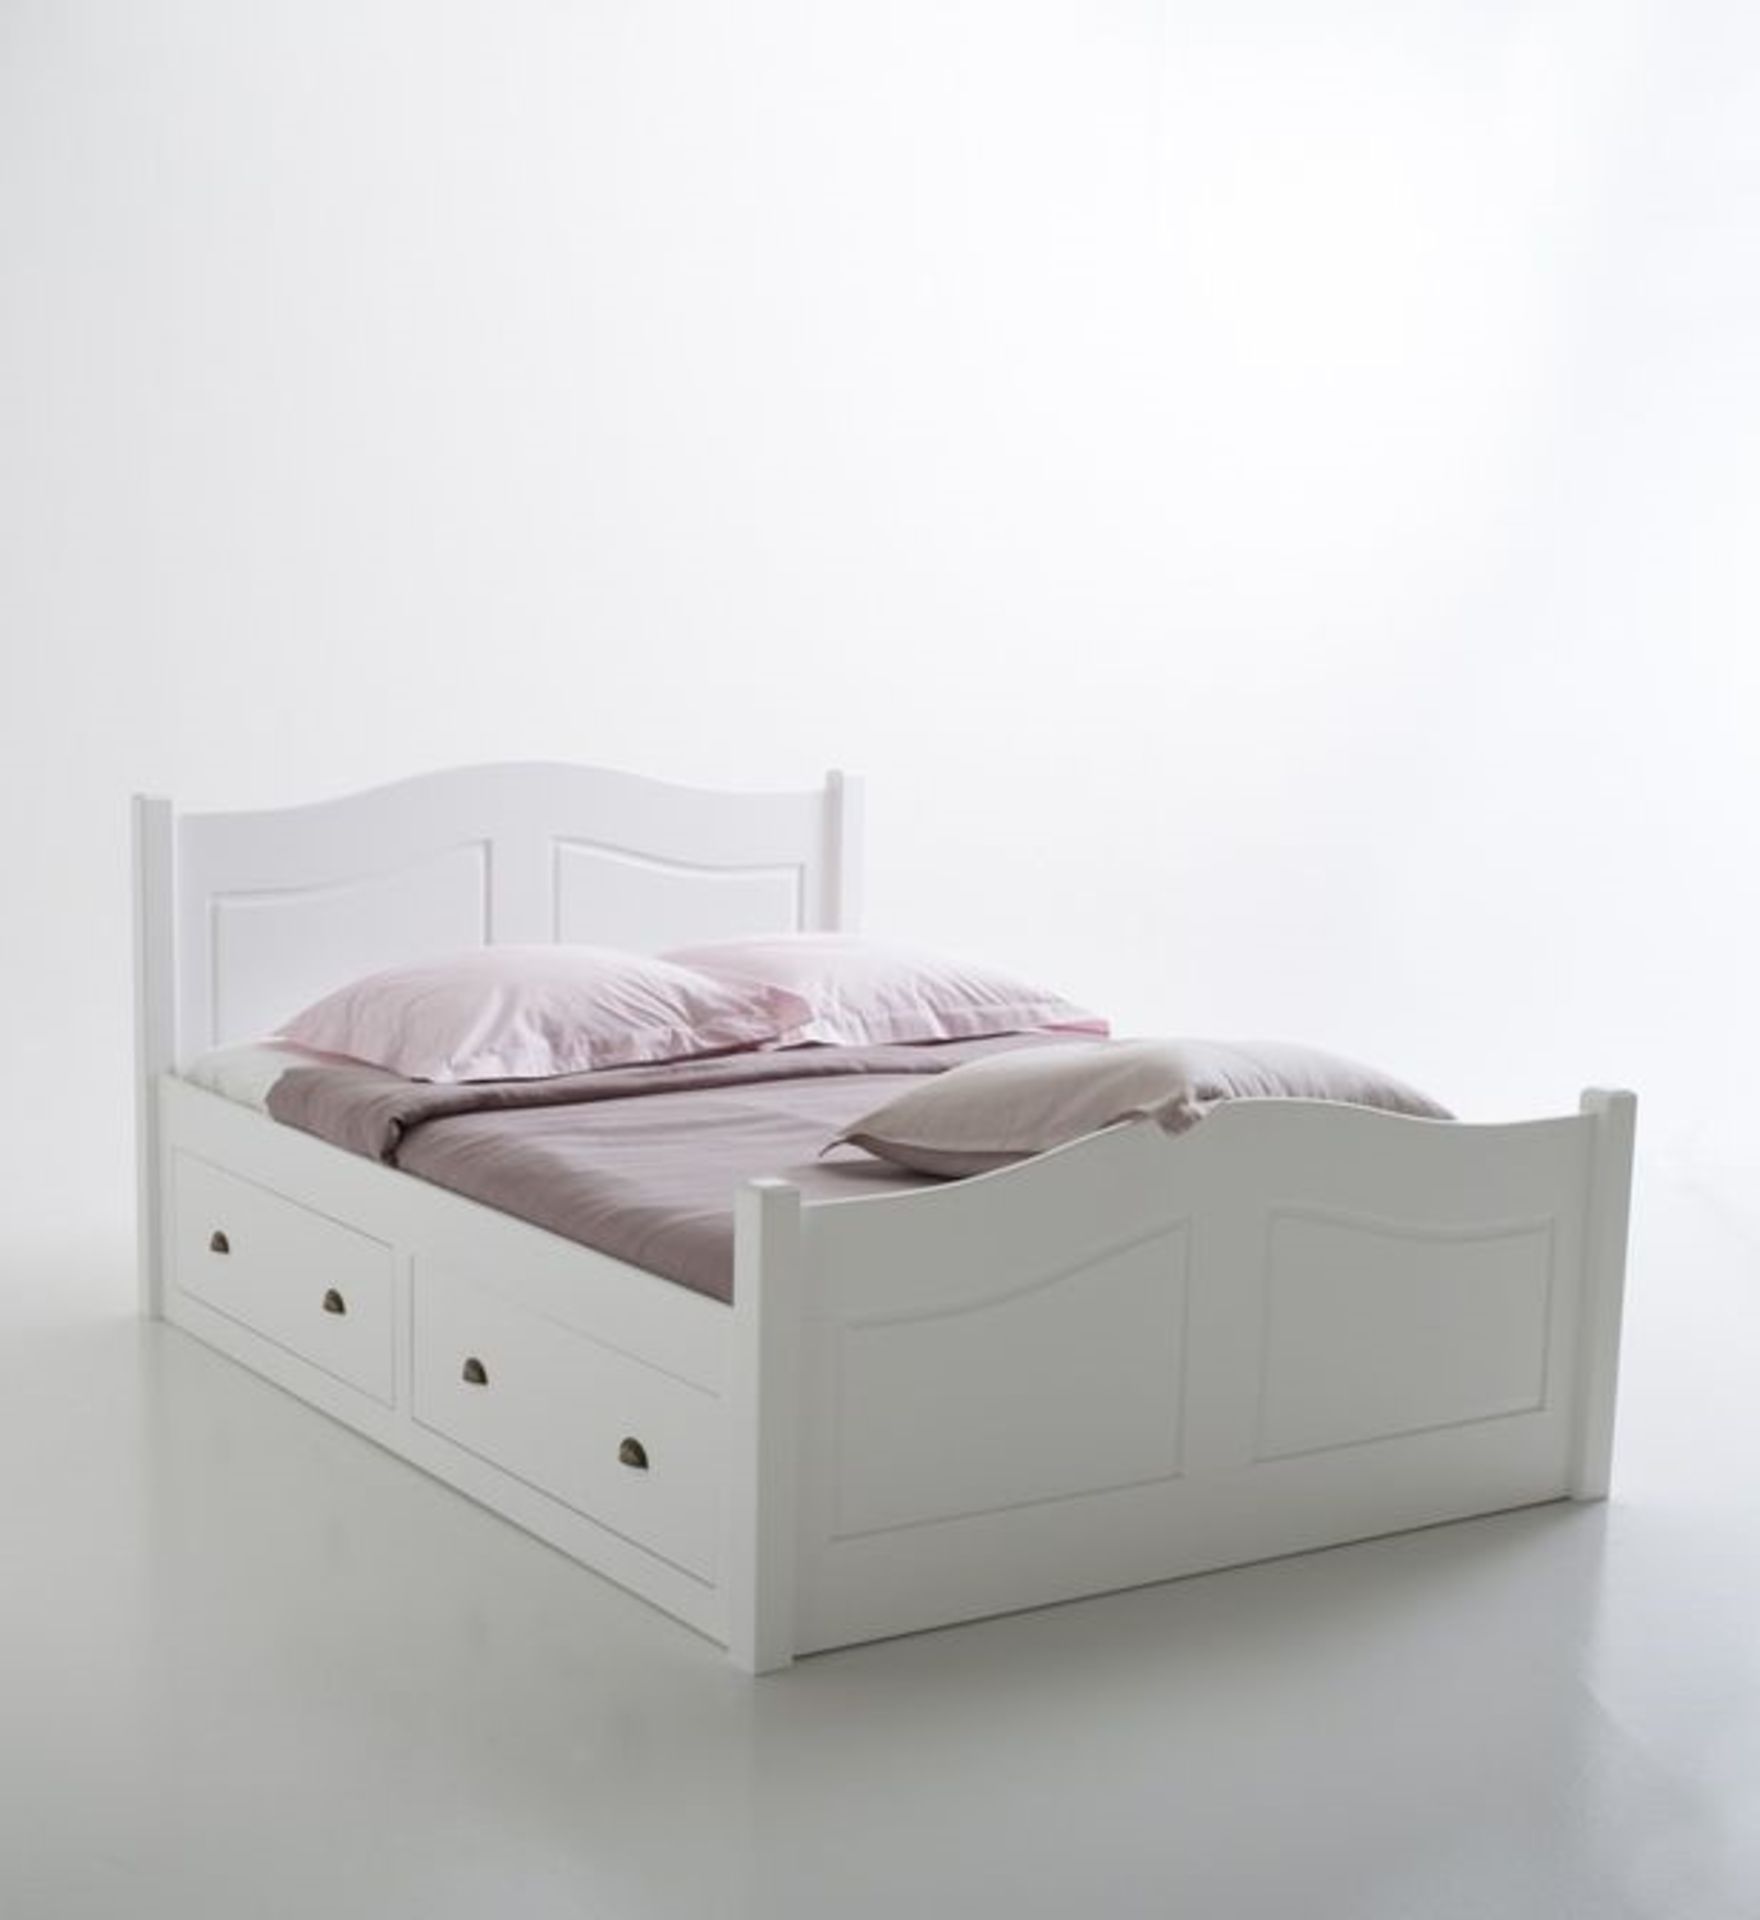 1 GRADE A BOXED DESIGNER LIT PINE AND MDF 4 DRAWER BED IN WHITE / SIZE UNKNOWN / RRP £846.00 (PUBLIC - Image 2 of 2